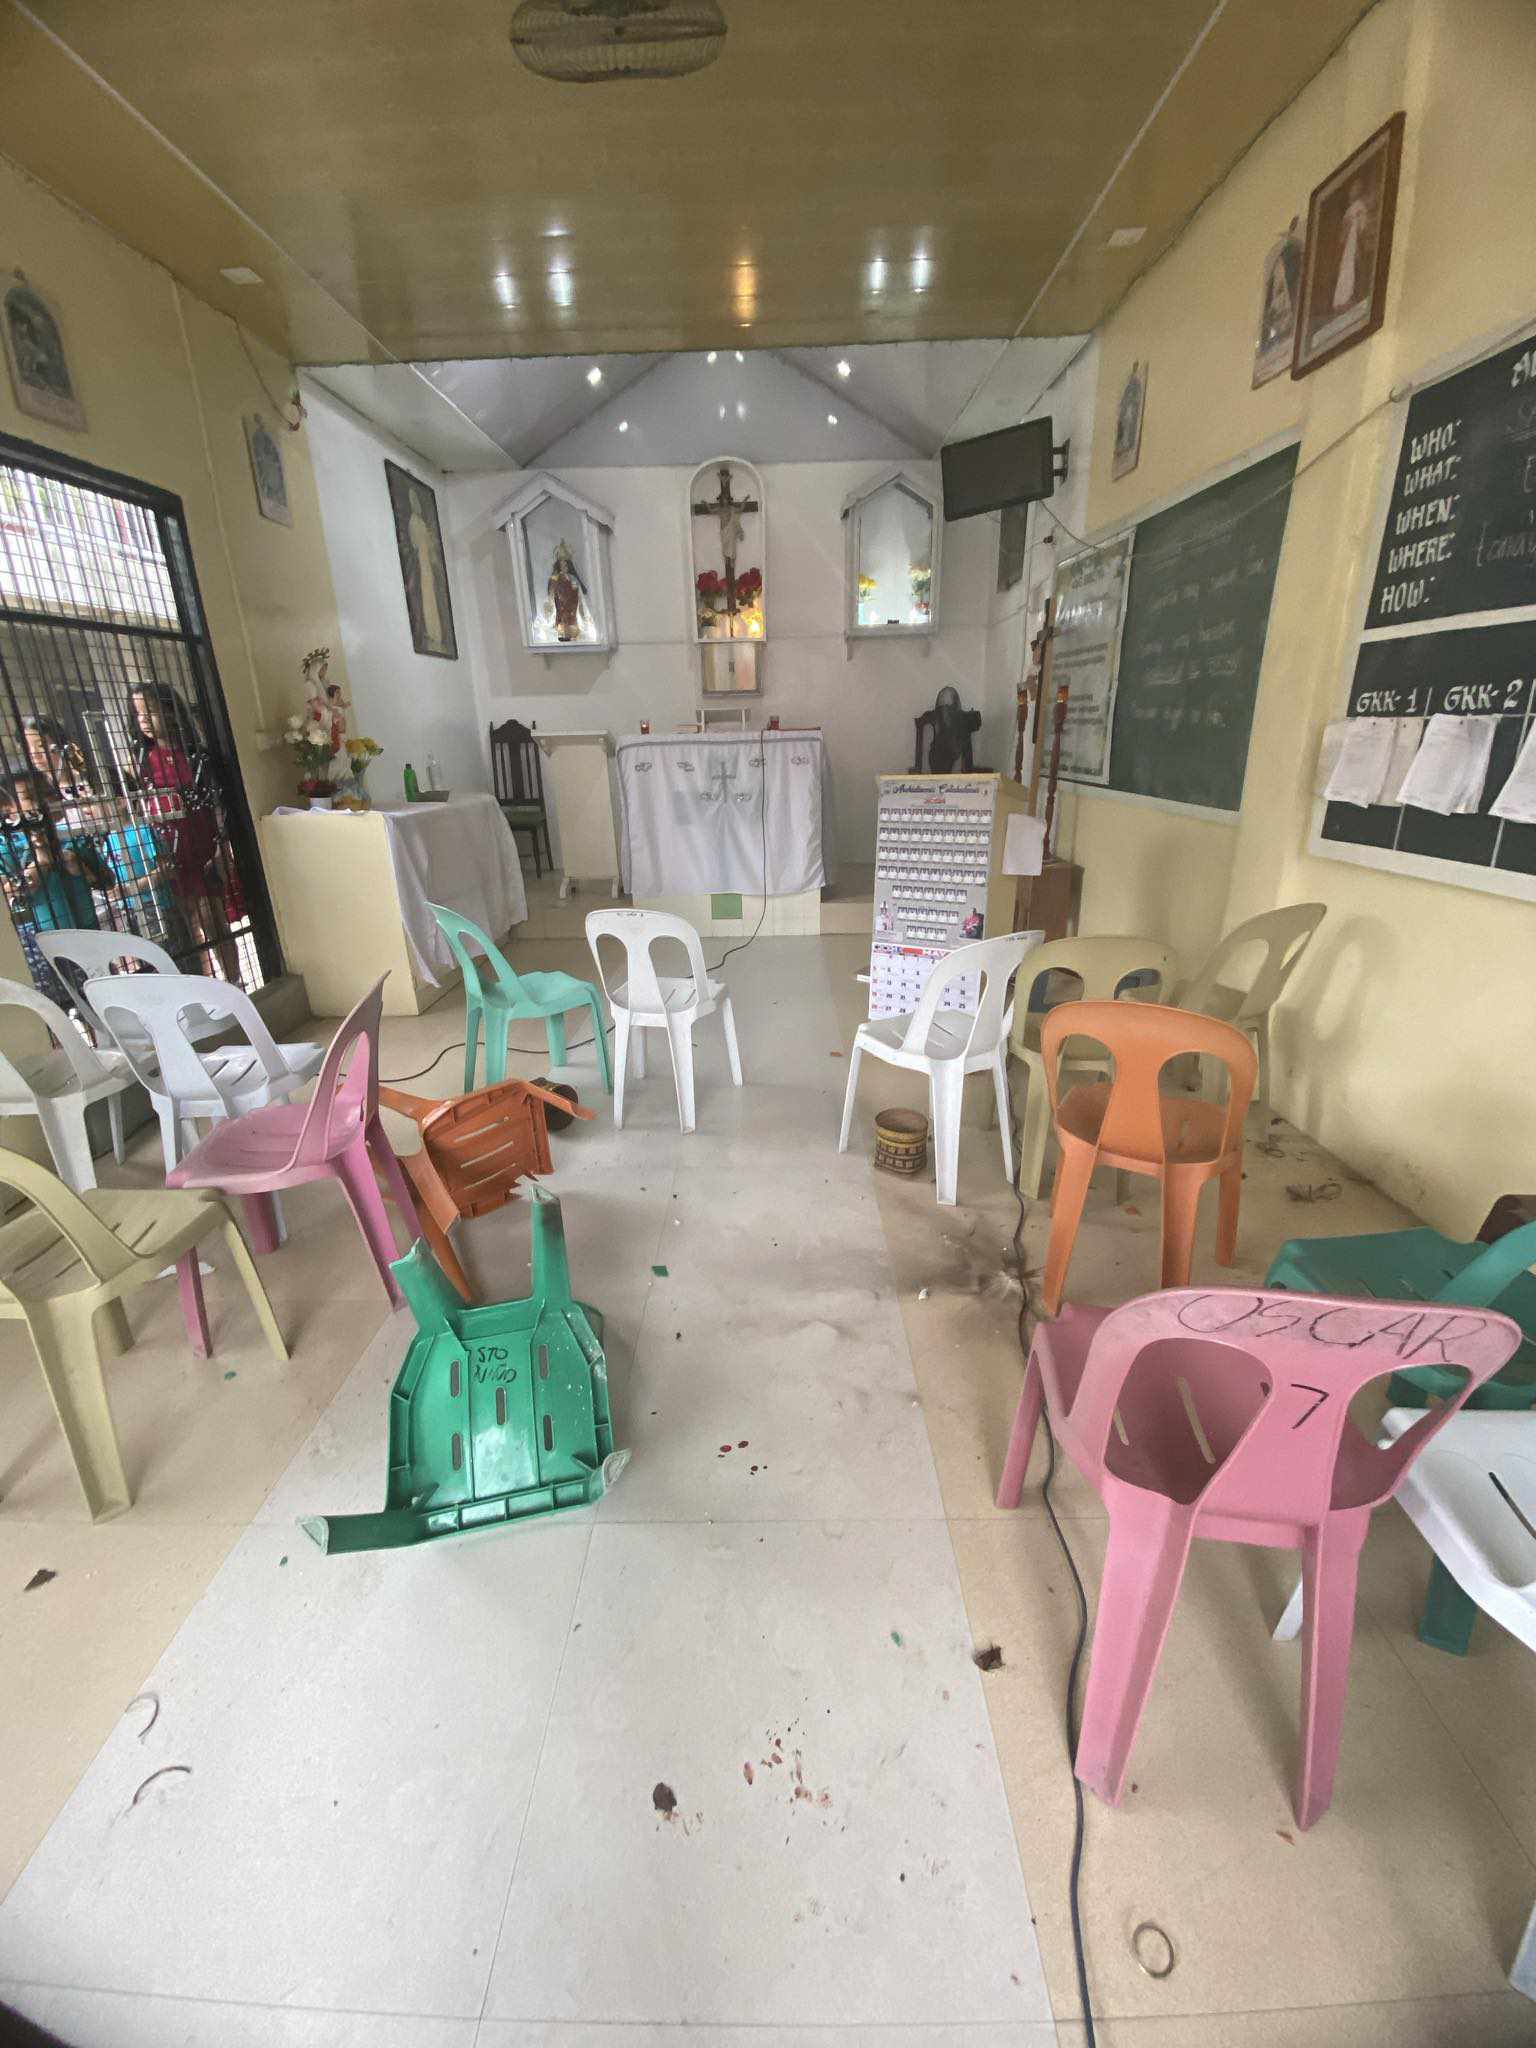 Grenade attack on a Catholic chapel in Cotabato City injures 2 persons